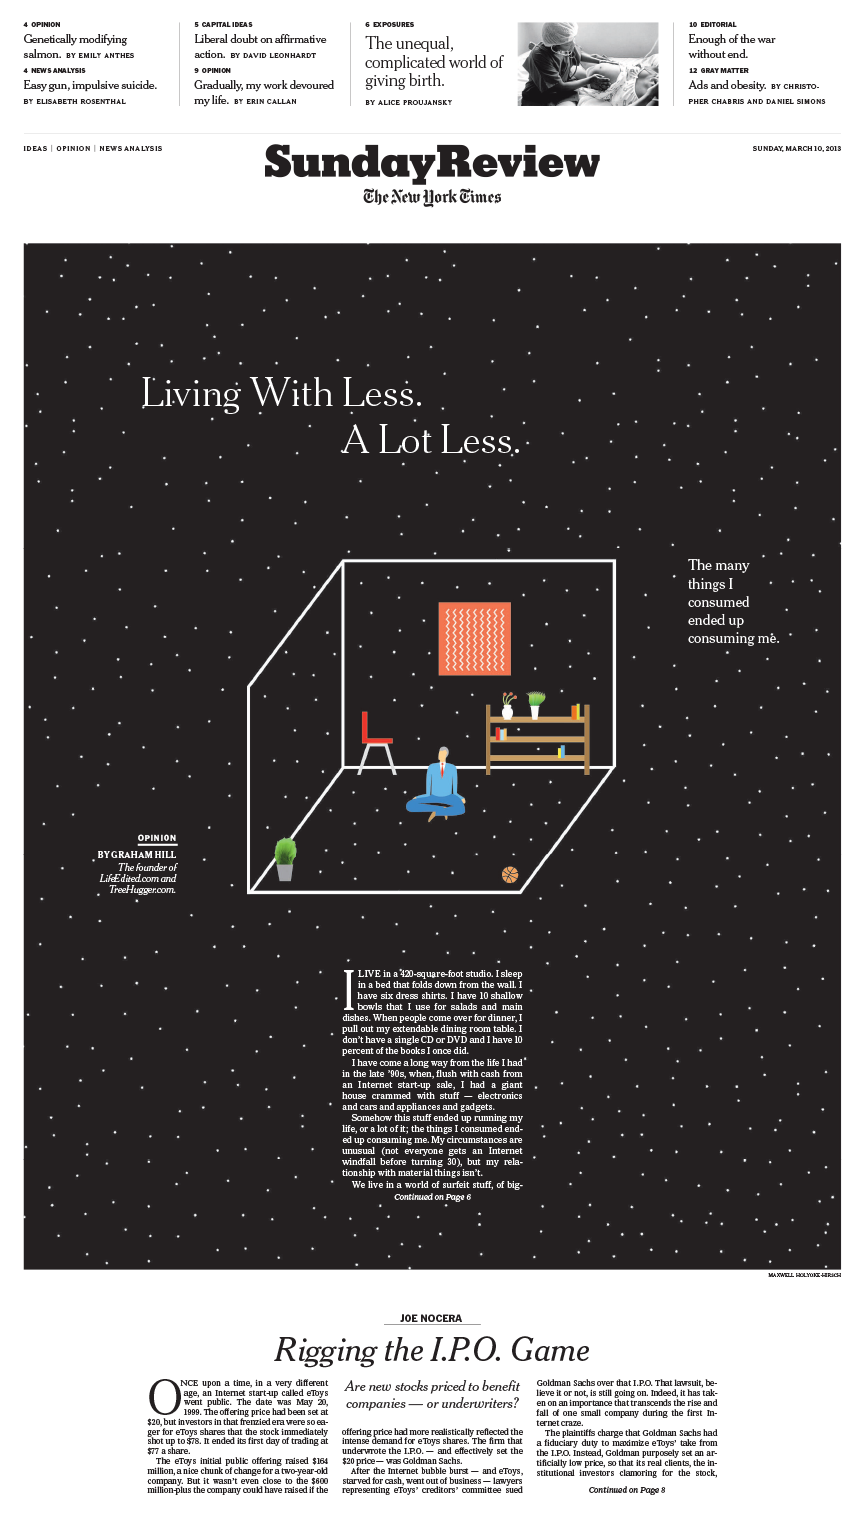 Sunday Review Cover: Living With Less. A Lot Less.